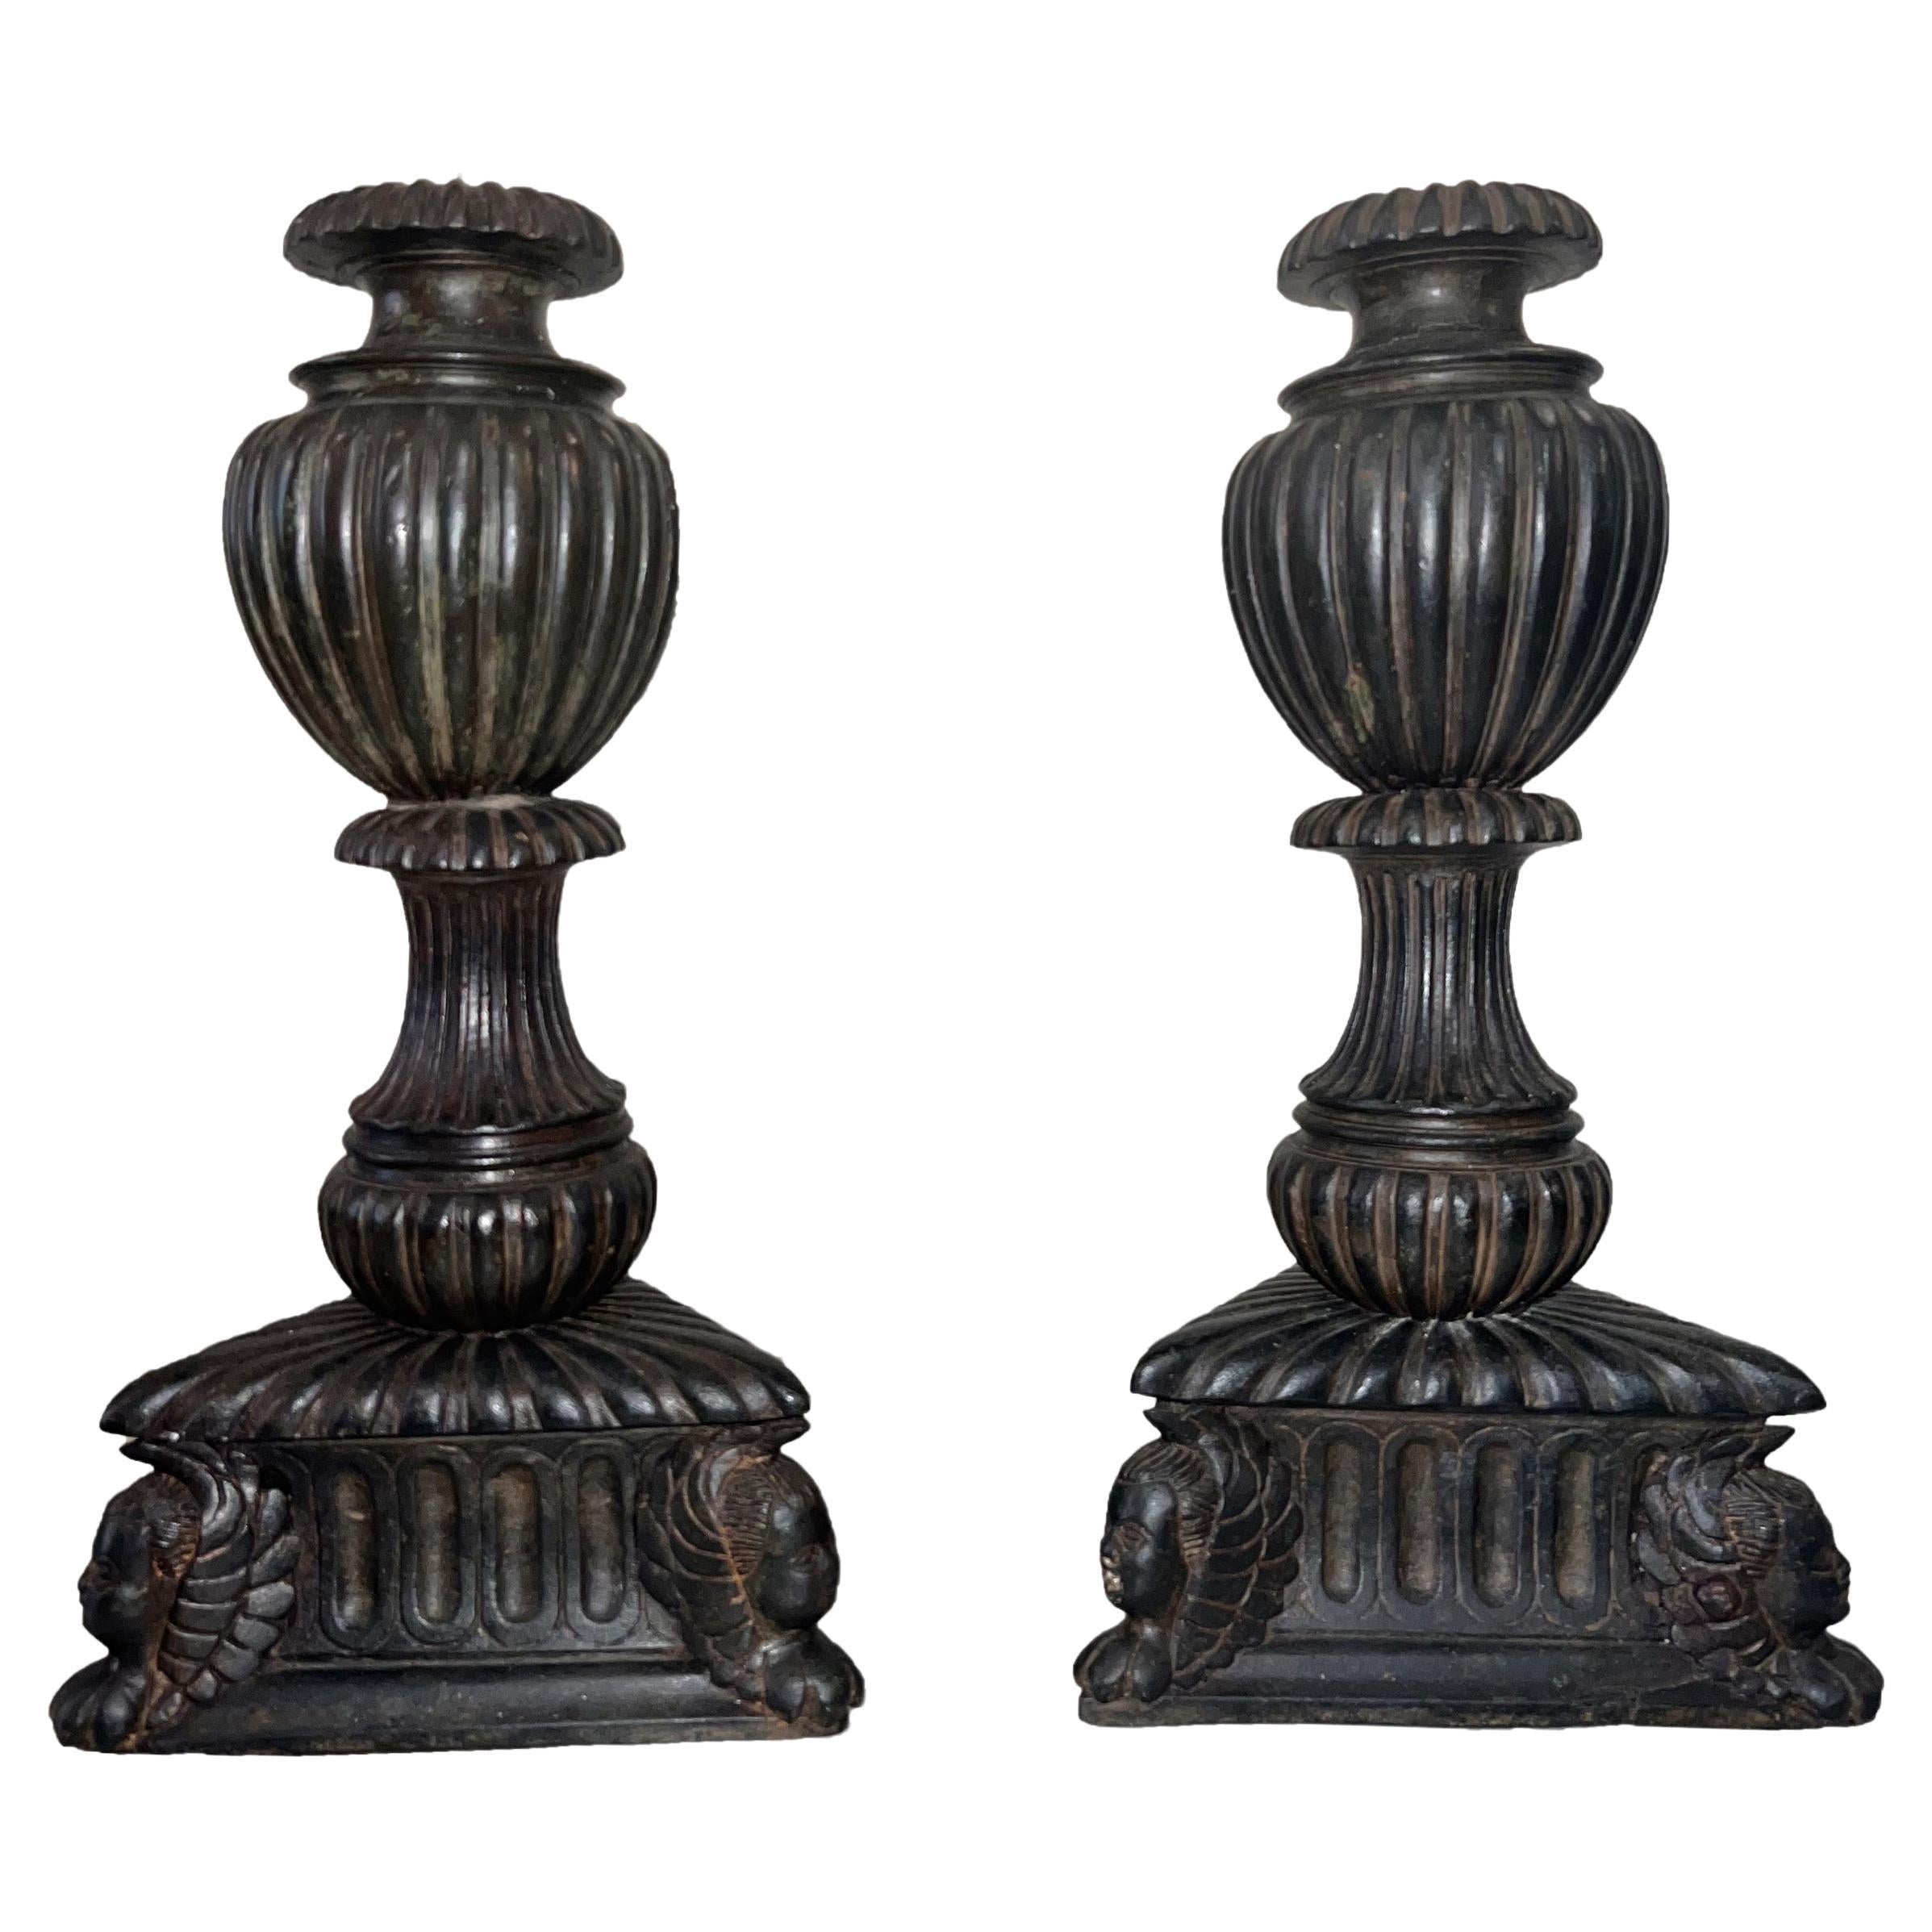 Florence, 16th Century Couple of Bronze Candlesticks Bases